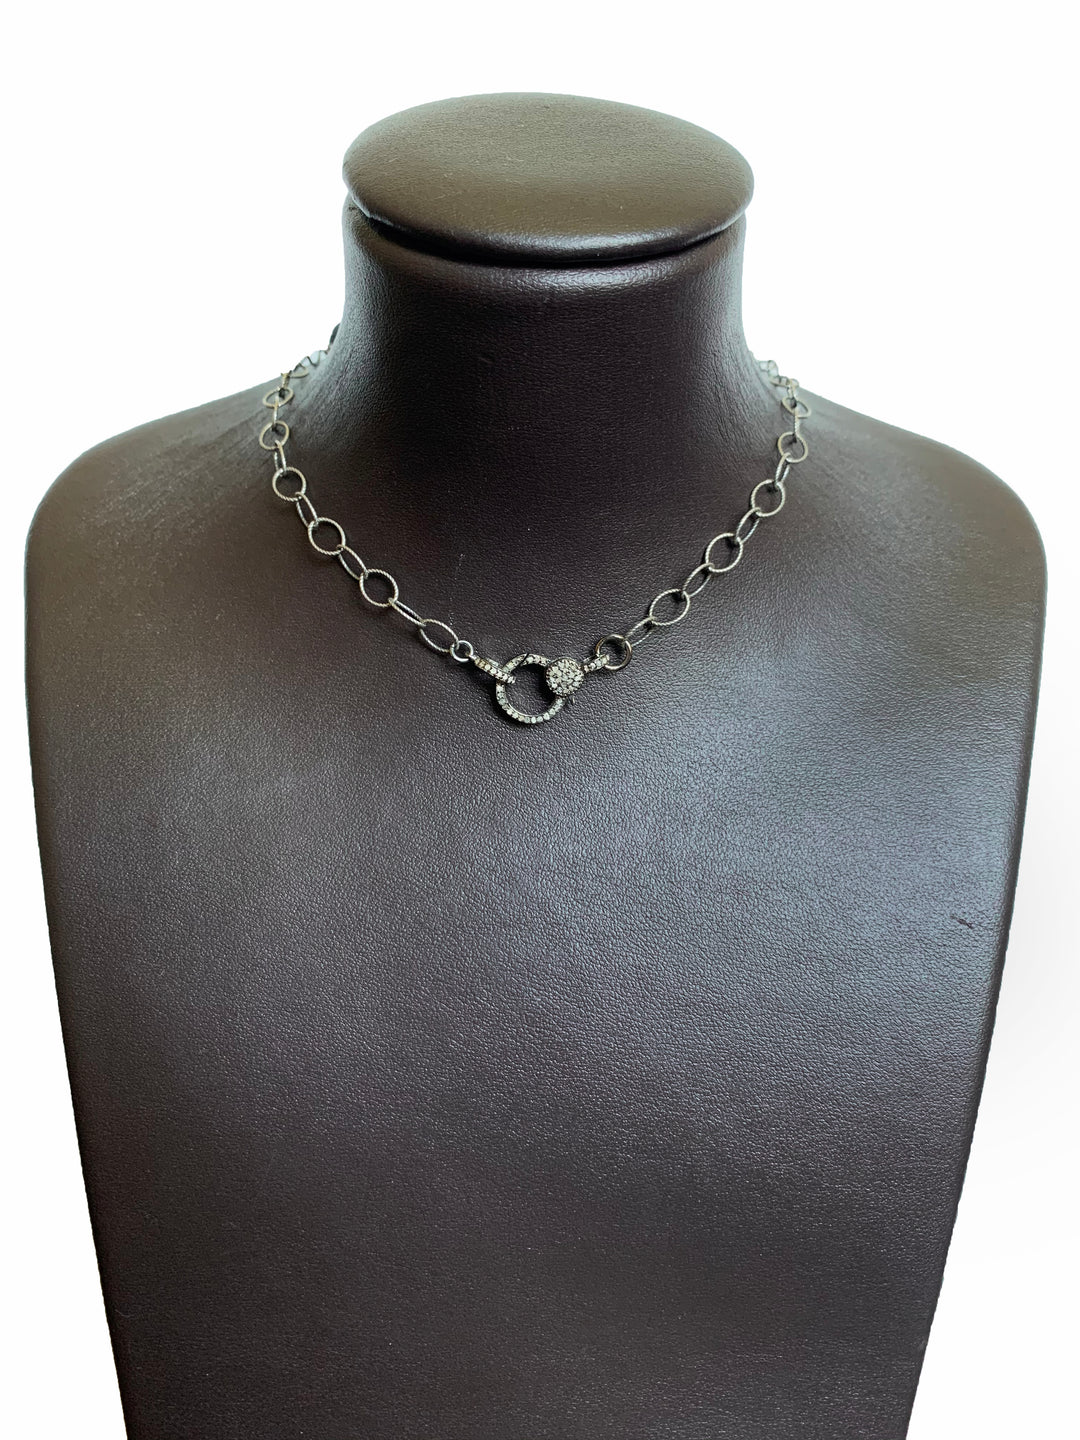 Silver Chain With Diamond Clasp - Kingfisher Road - Online Boutique